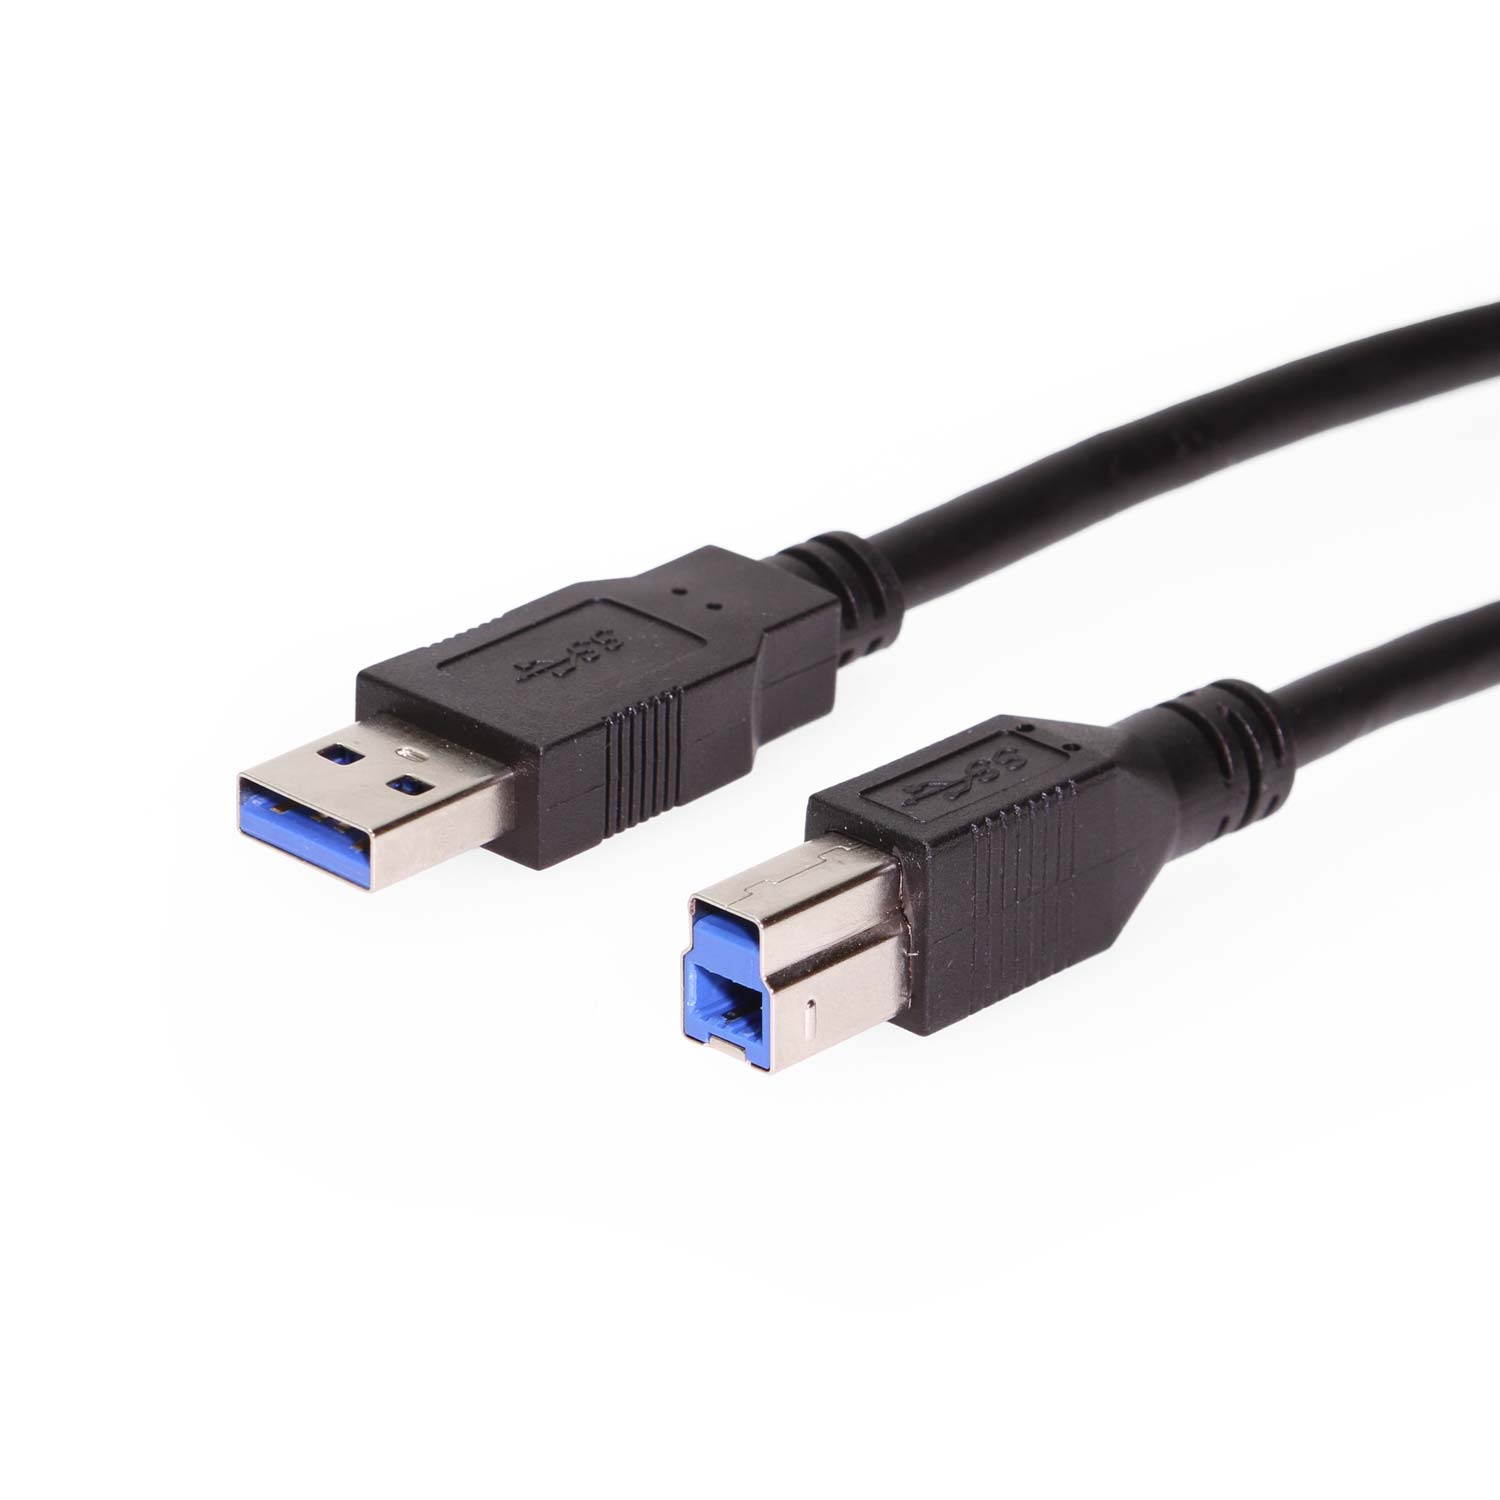 6ft USB 3.2 Gen 1 Type-A to Type-B SuperSpeed Cable